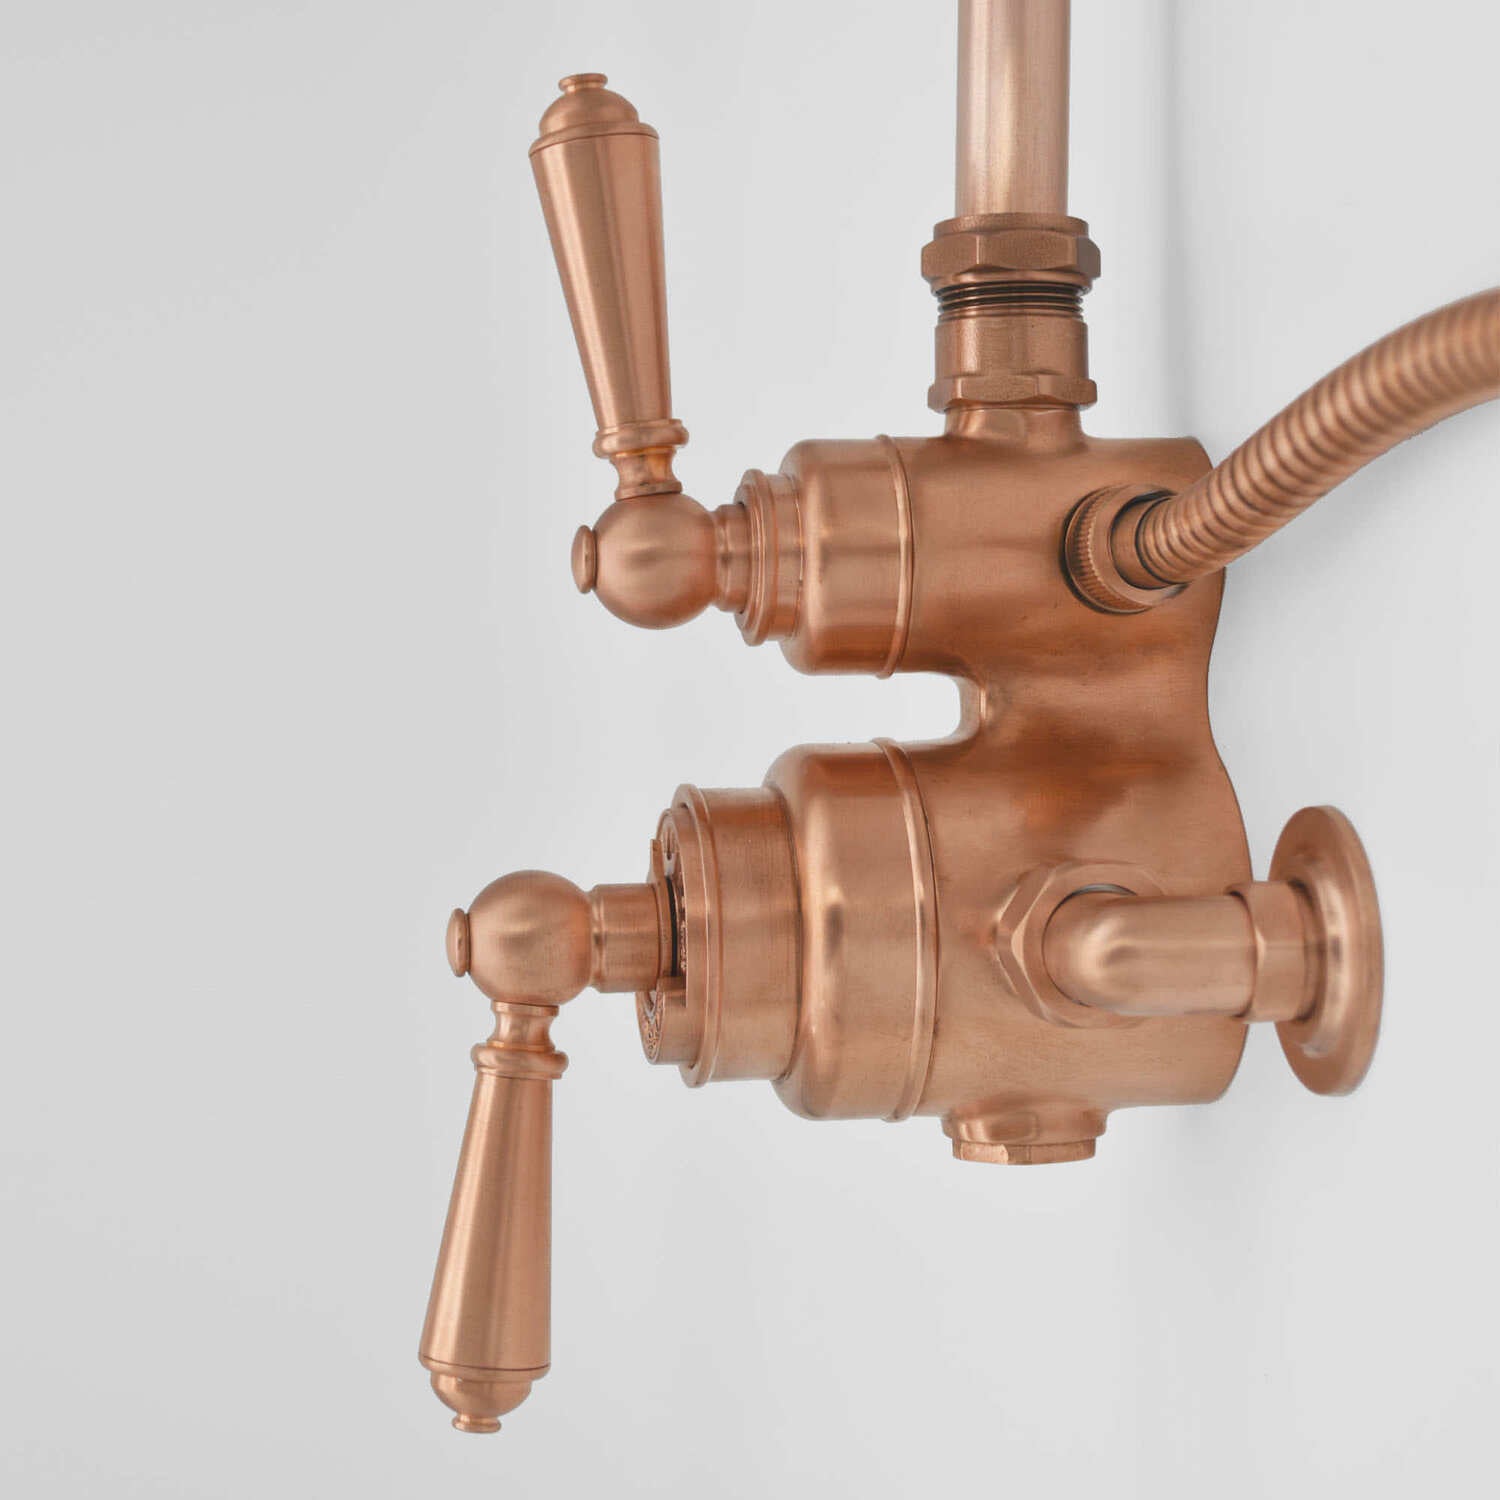 High-quality copper valve for optimal water flow and pressure control - side image